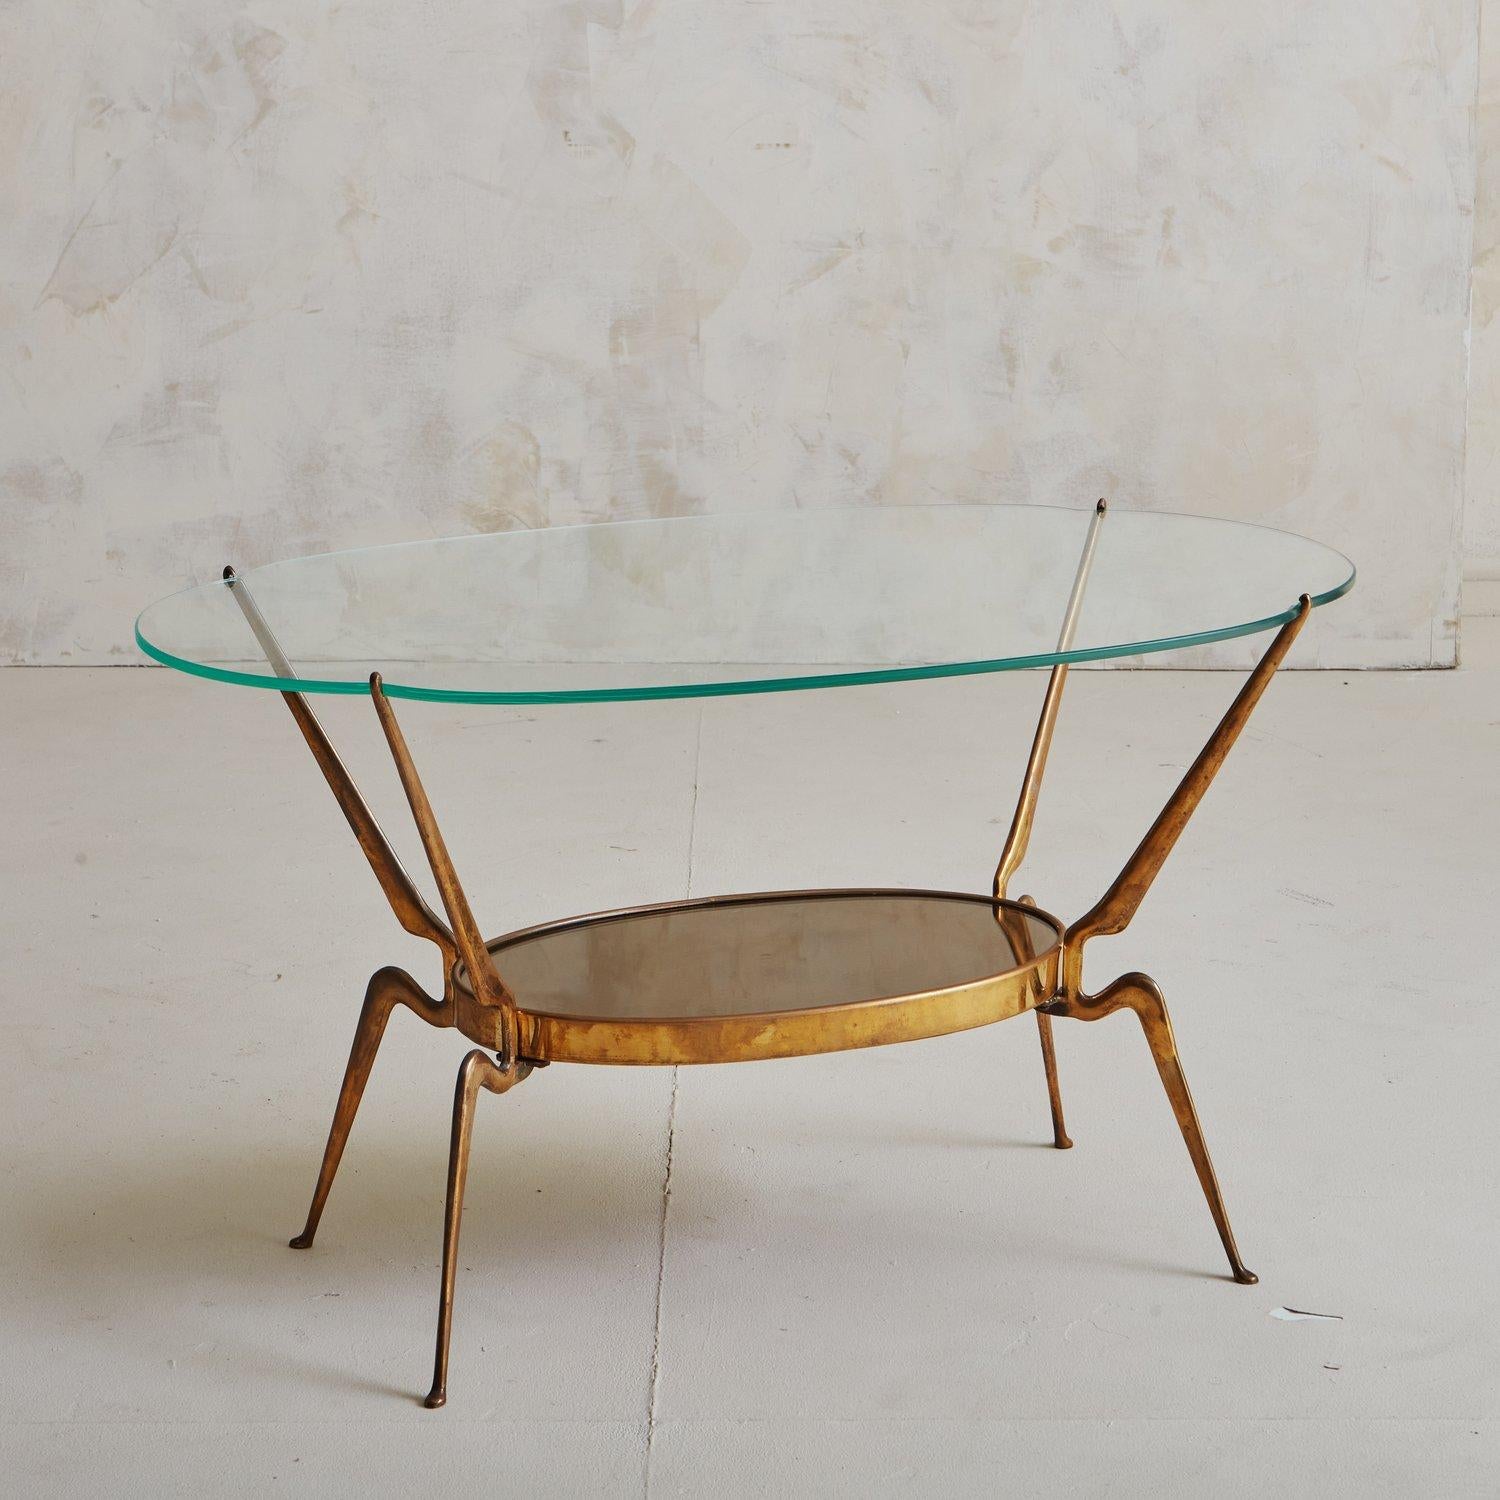 An elegant Italian coffee table featuring a sculptural brass base with a gorgeous patina and an oval back painted glass shelf. The base supports an oval glass top with subtle scalloped edges. Sourced in Italy, 1970s.

